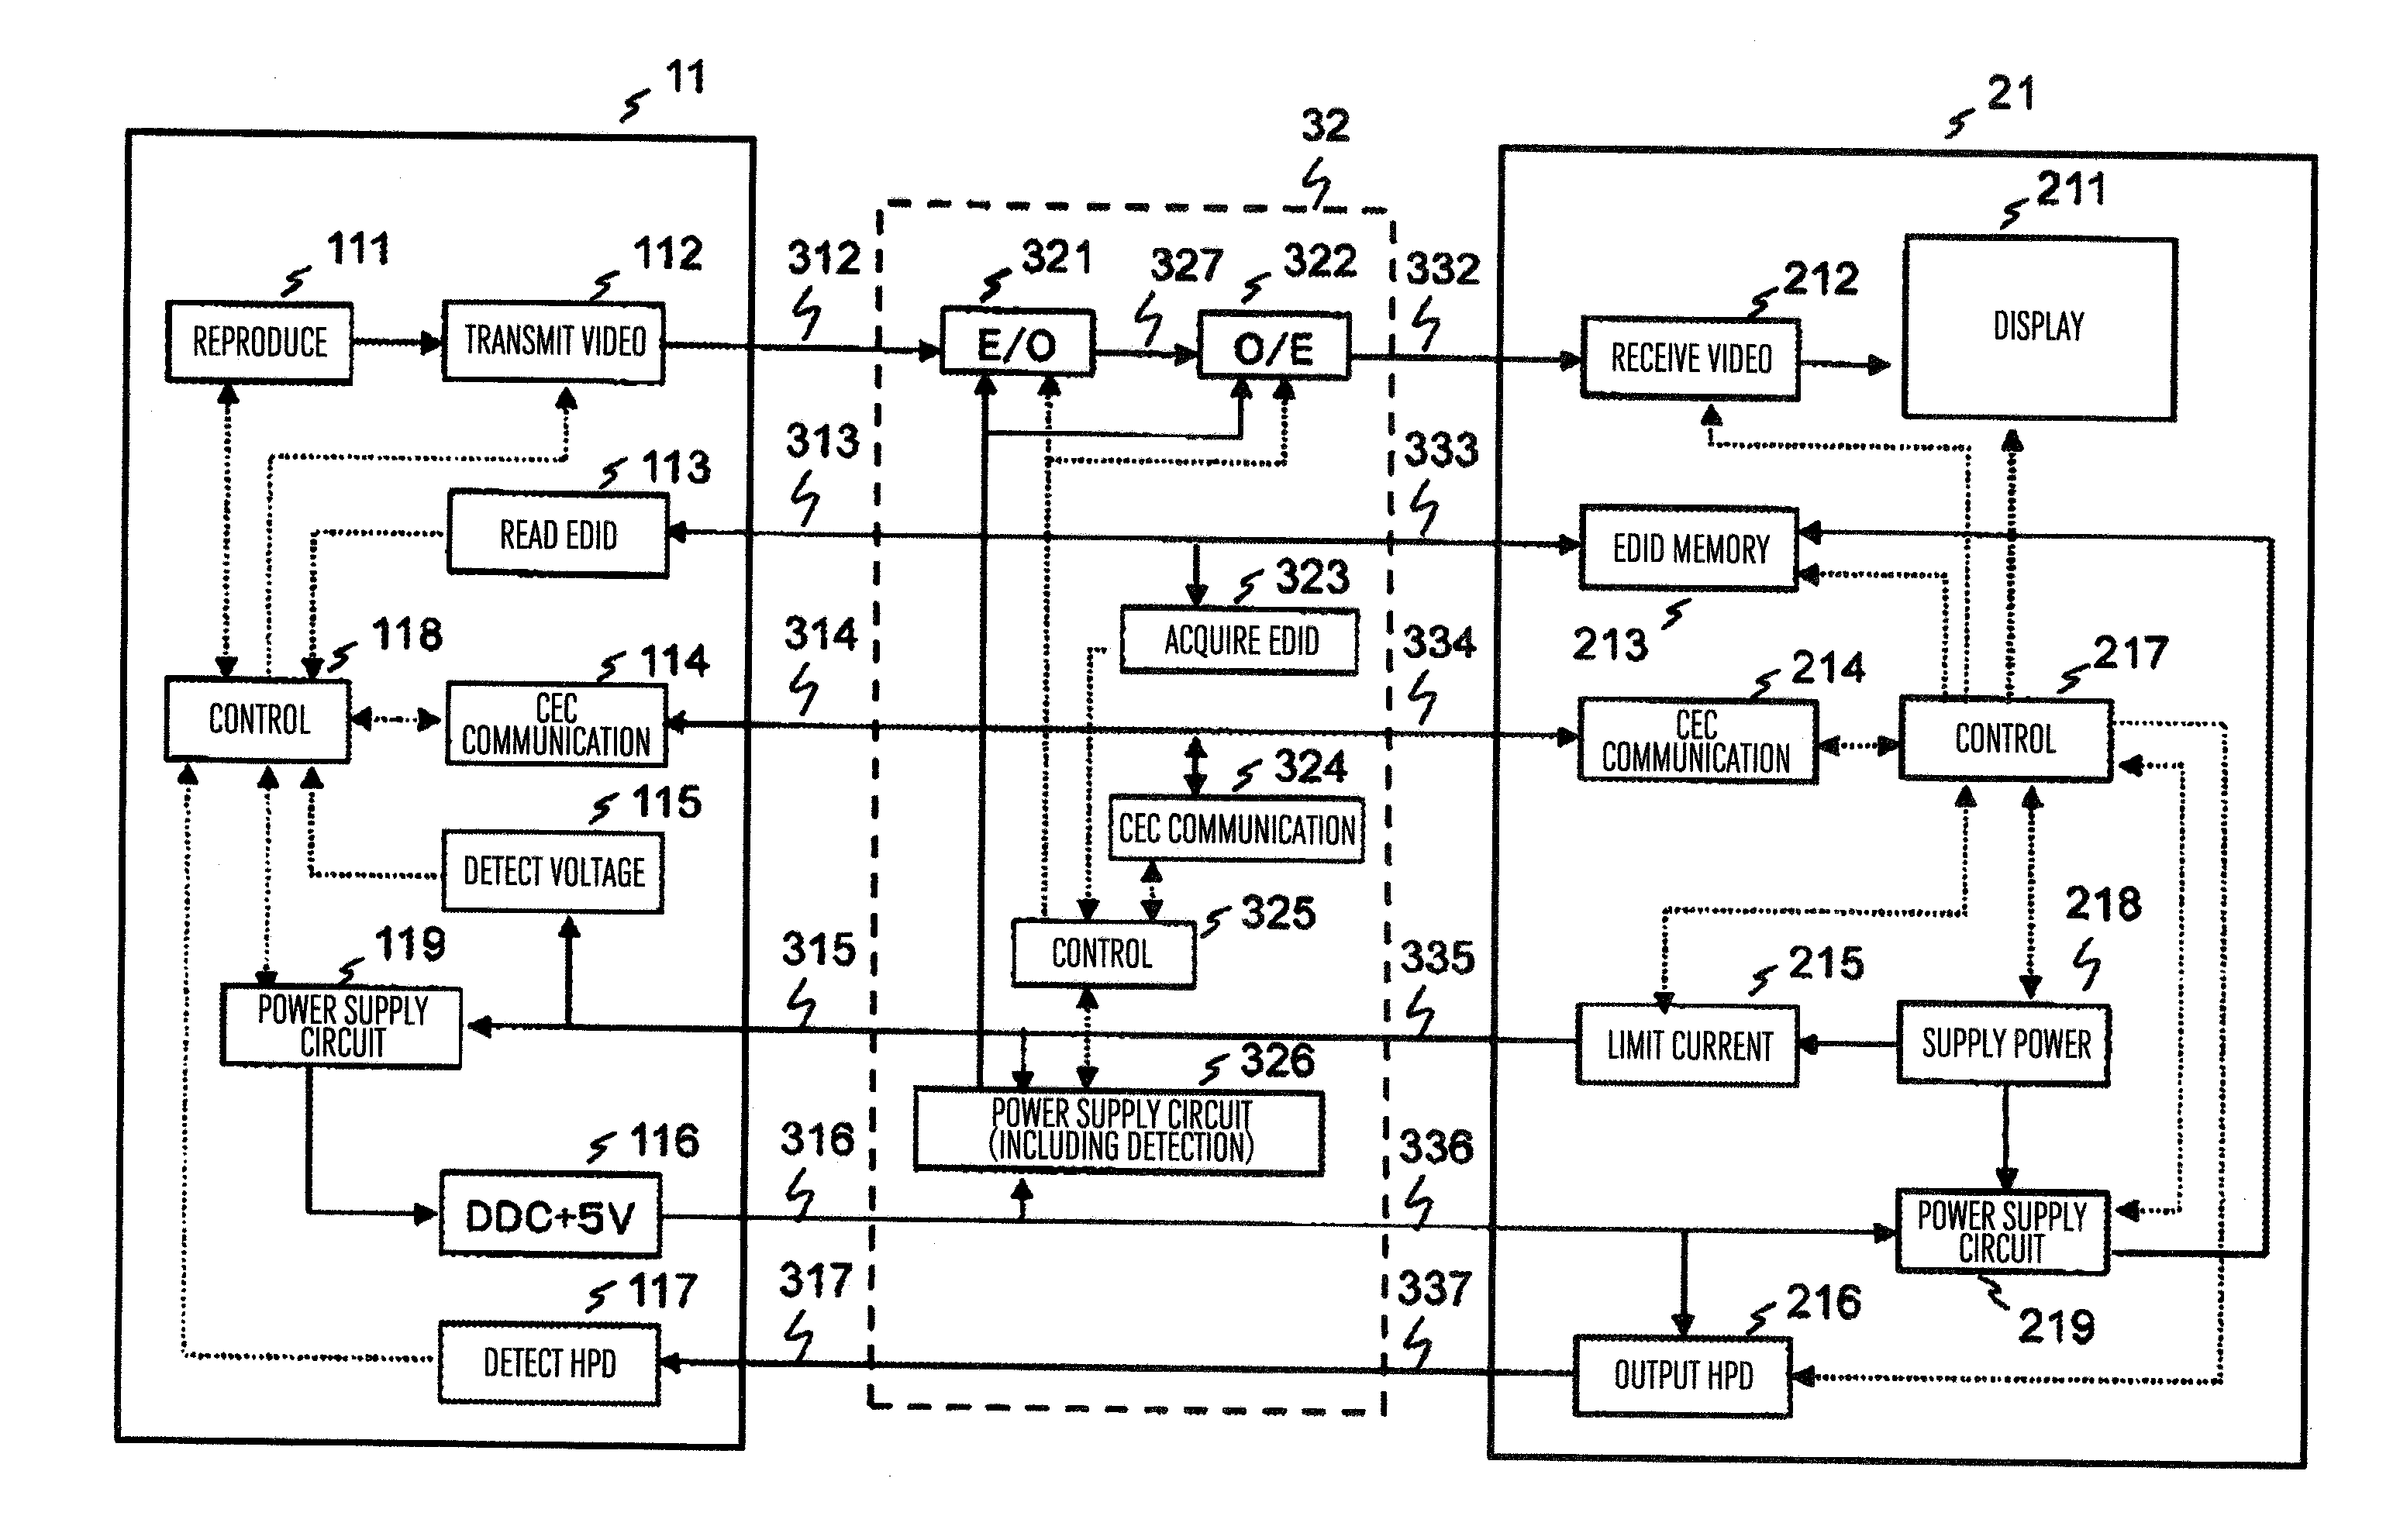 Transmission system and relay device